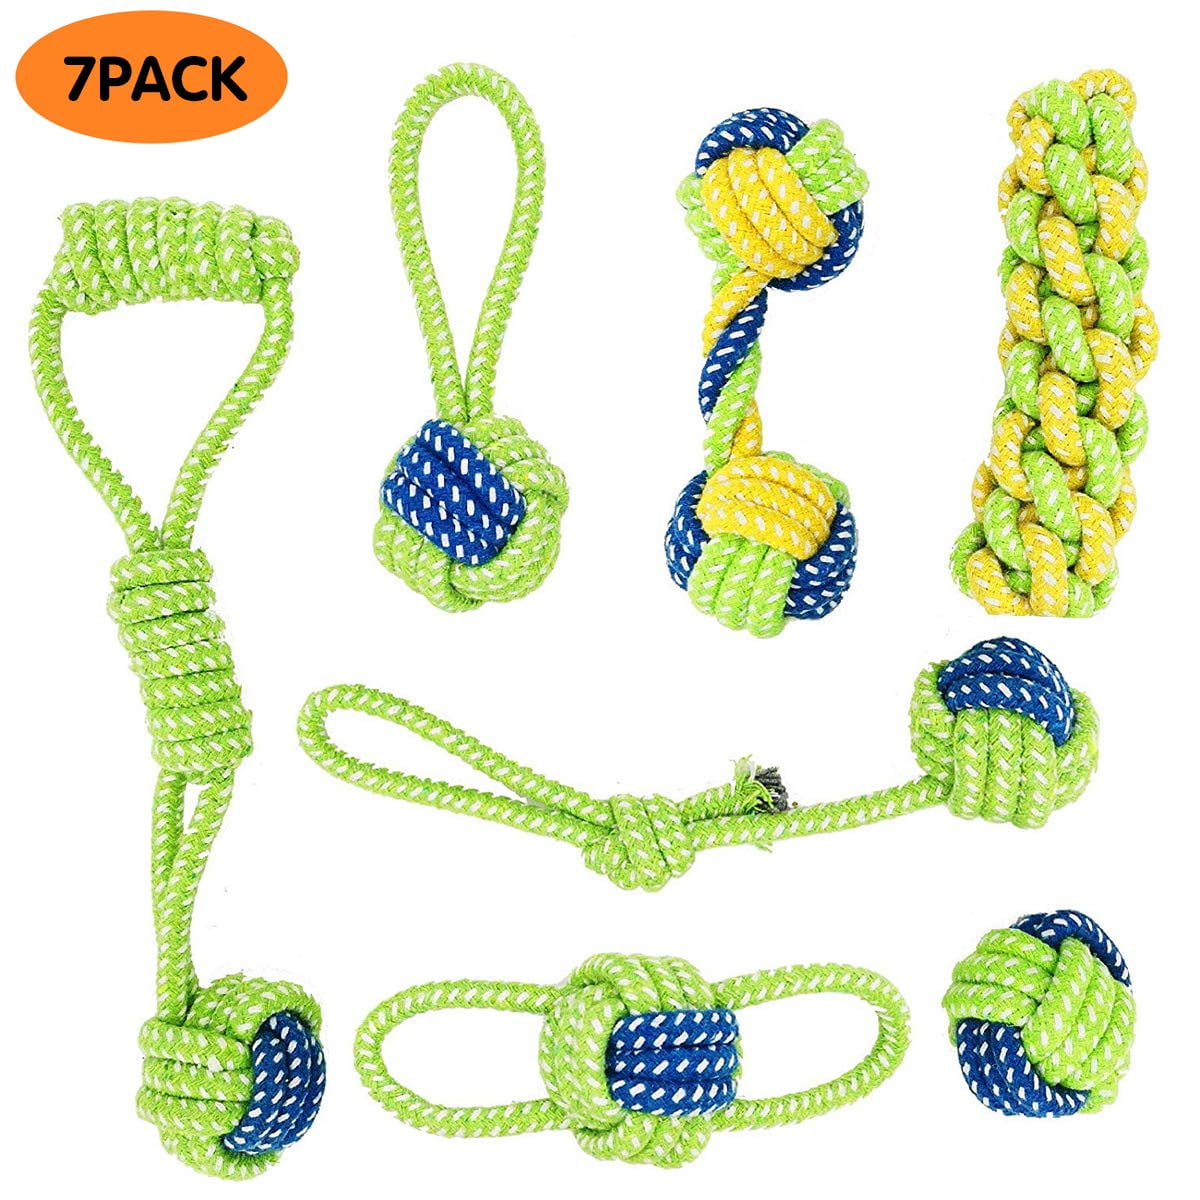 WAND® Dog Toy Kit Puppy Chew Toy Yellow Duck Cotton Rope Toy for Easter Pet Gifts Small Medium Large Dog Pets Playtime Teeth Cleaning DOGS MAT 